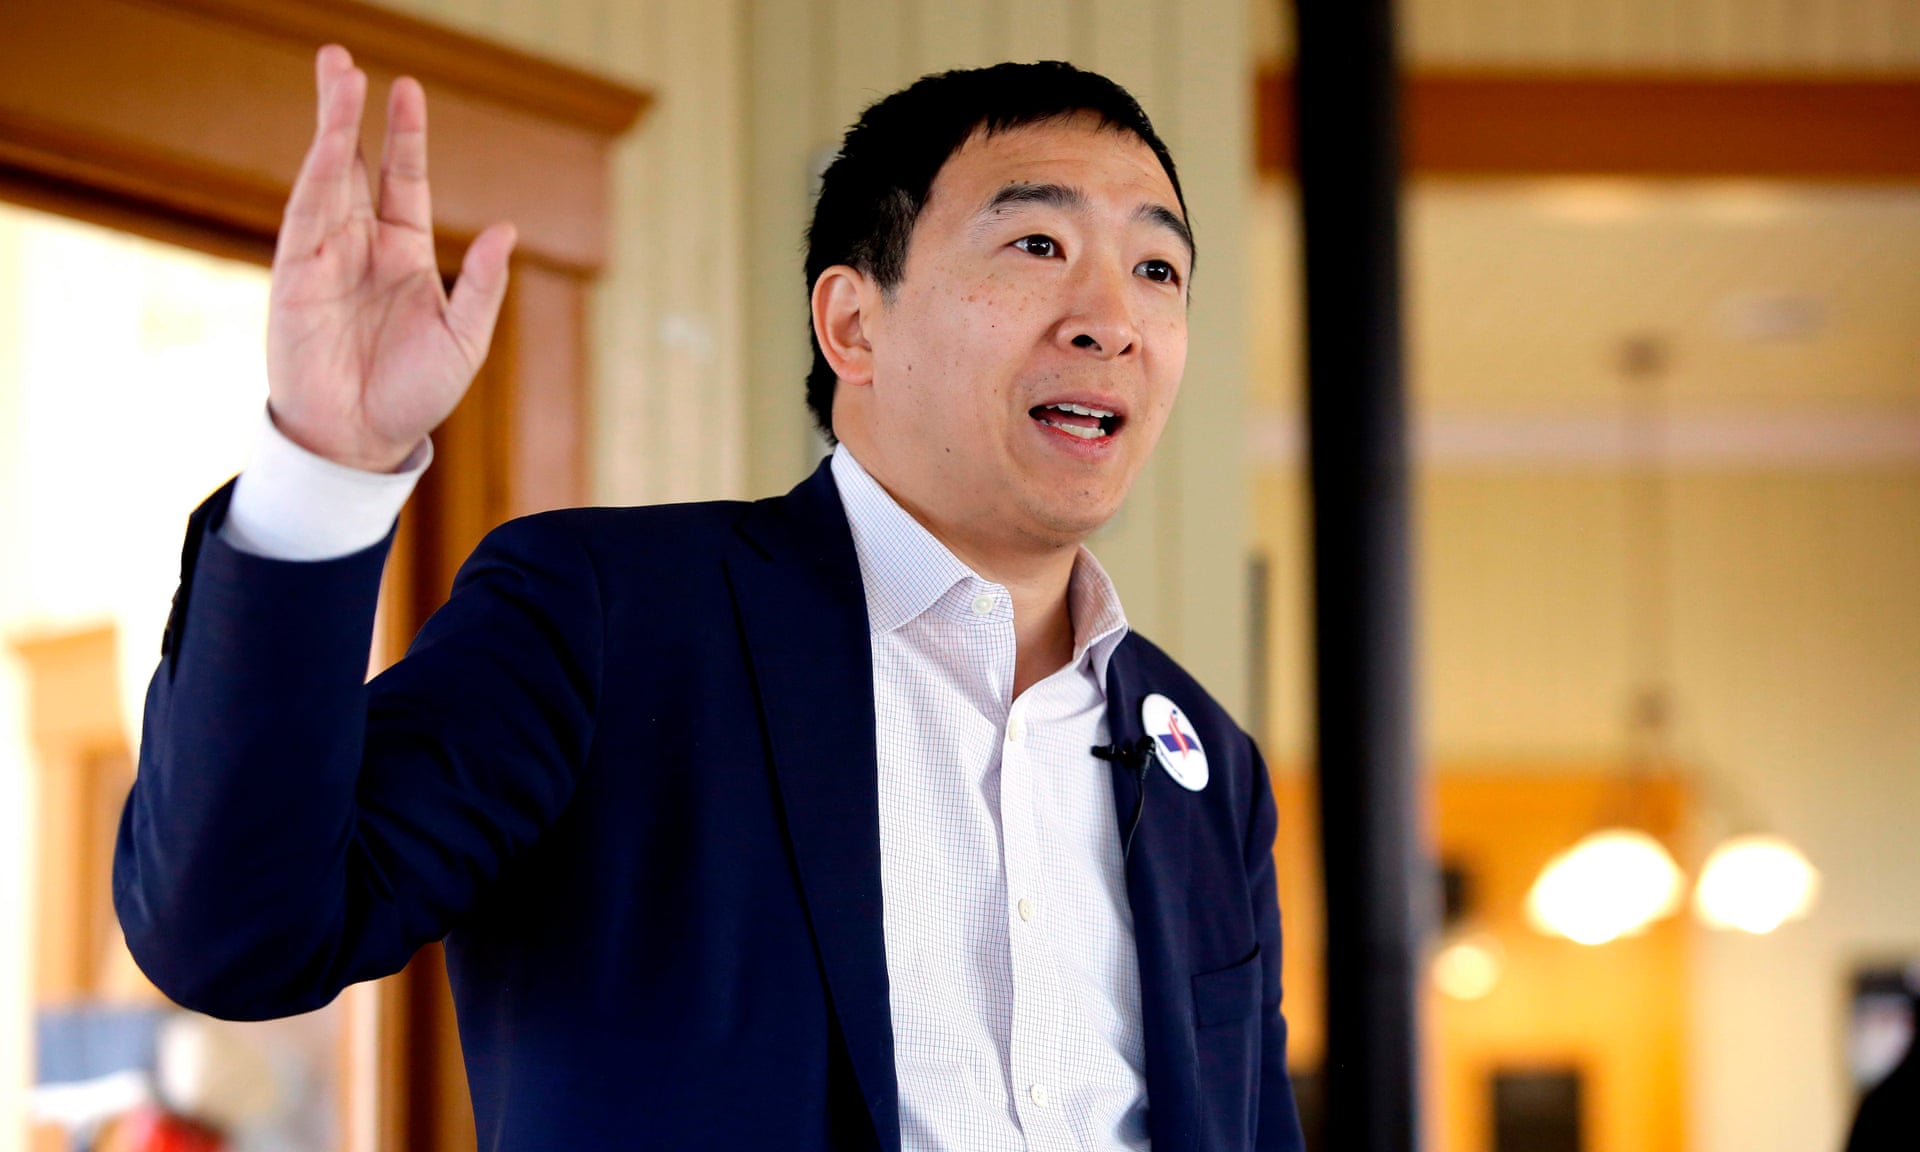 Andrew Yang: The 2020 Candidate Warning of the Rise of Robots | Occupy.com